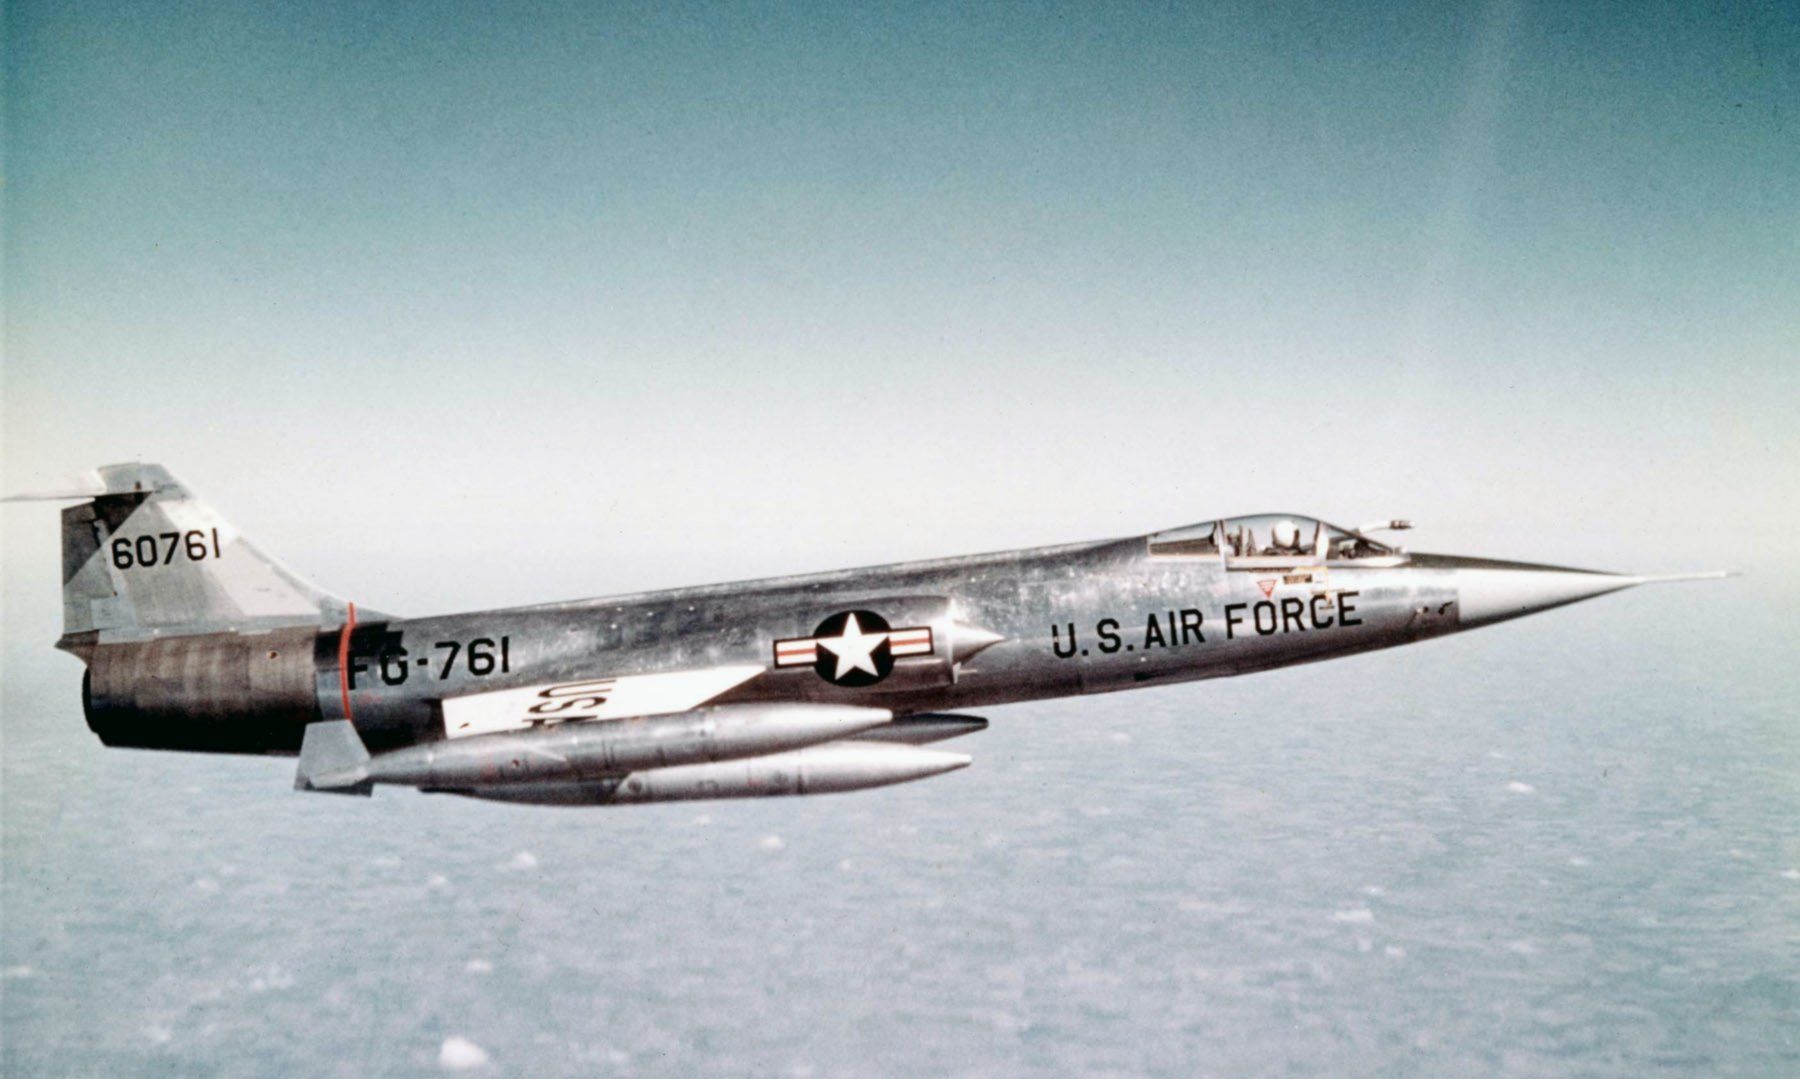 Aircrafts army Fighter jets USA lockheed F 104 starfighter